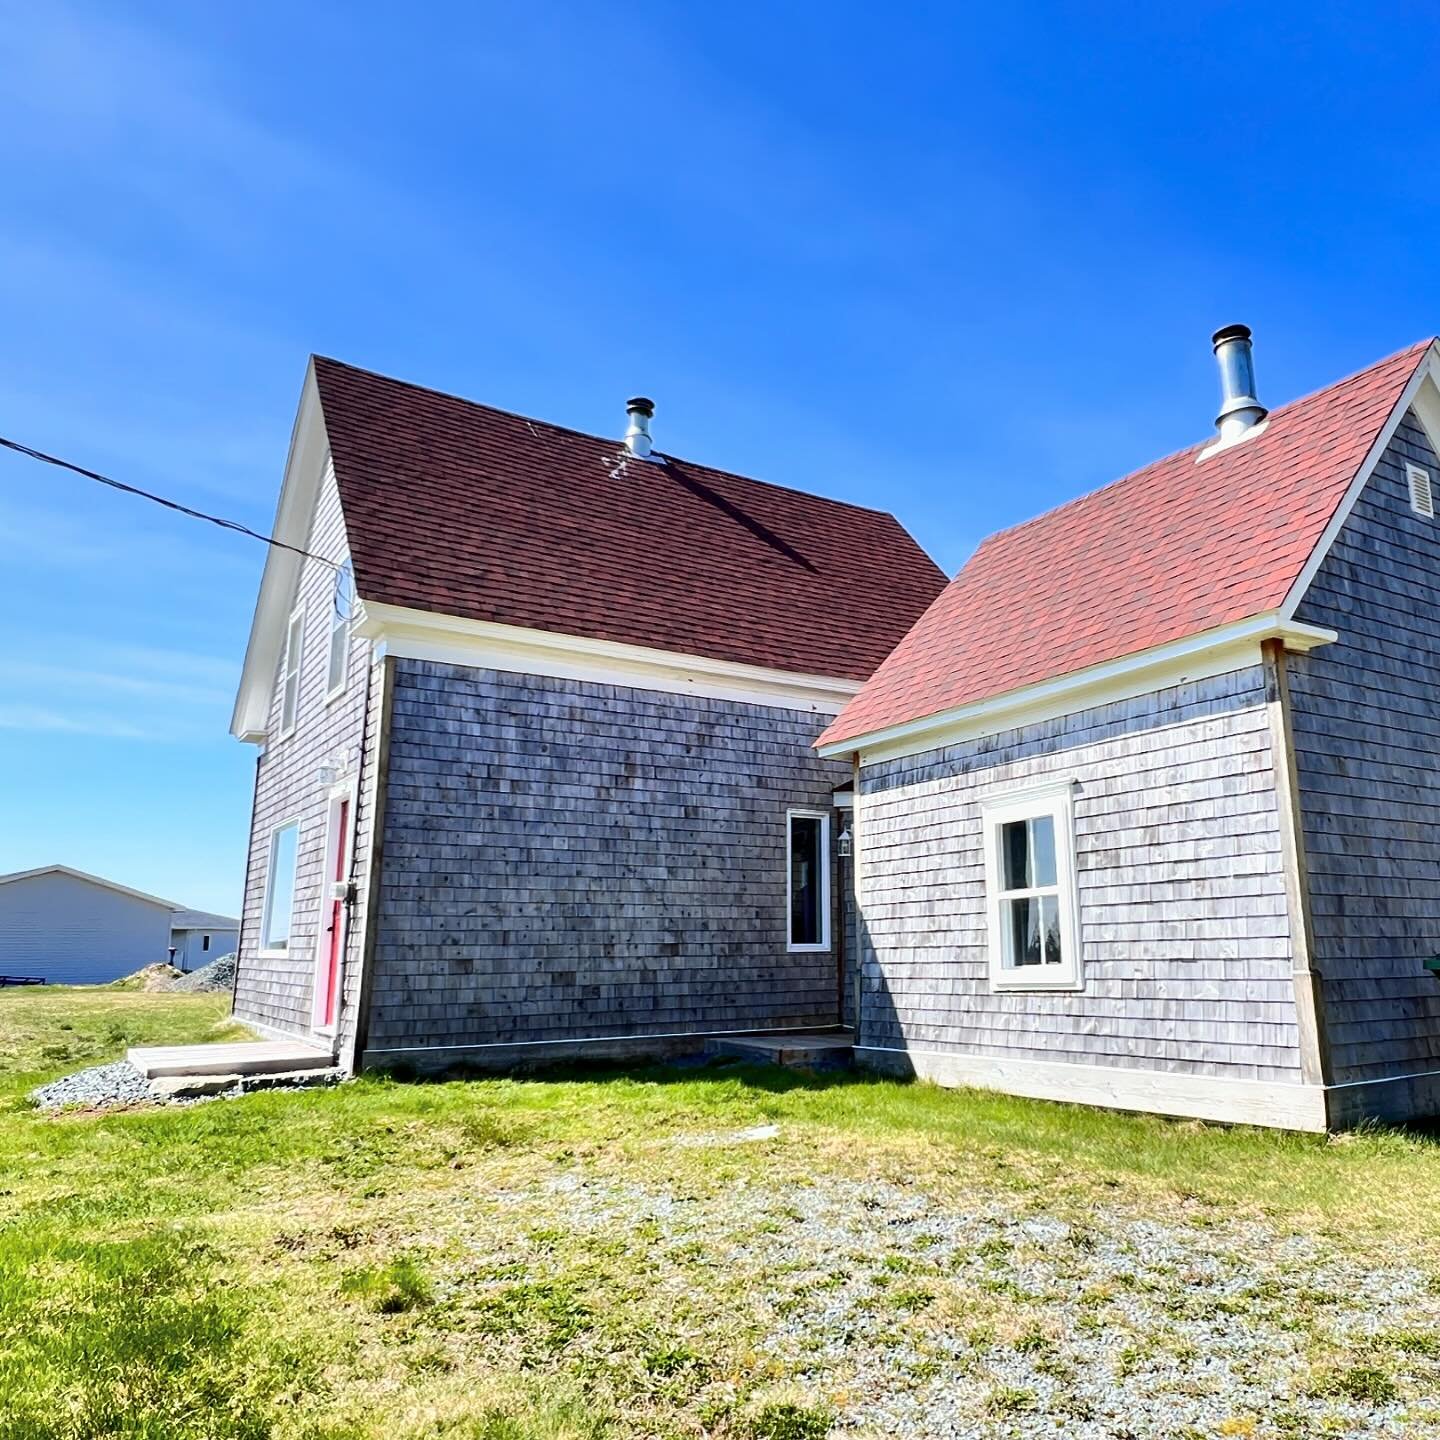 Can hardly wait to stage this unique 200 year old waterfront property. Stay tuned!

@kellithainrealestate 
#uniquehomes #antiques #solidwood #characterhome #cedarshingles #waterfront #oceanfront #novascotia #novascotiarealestate